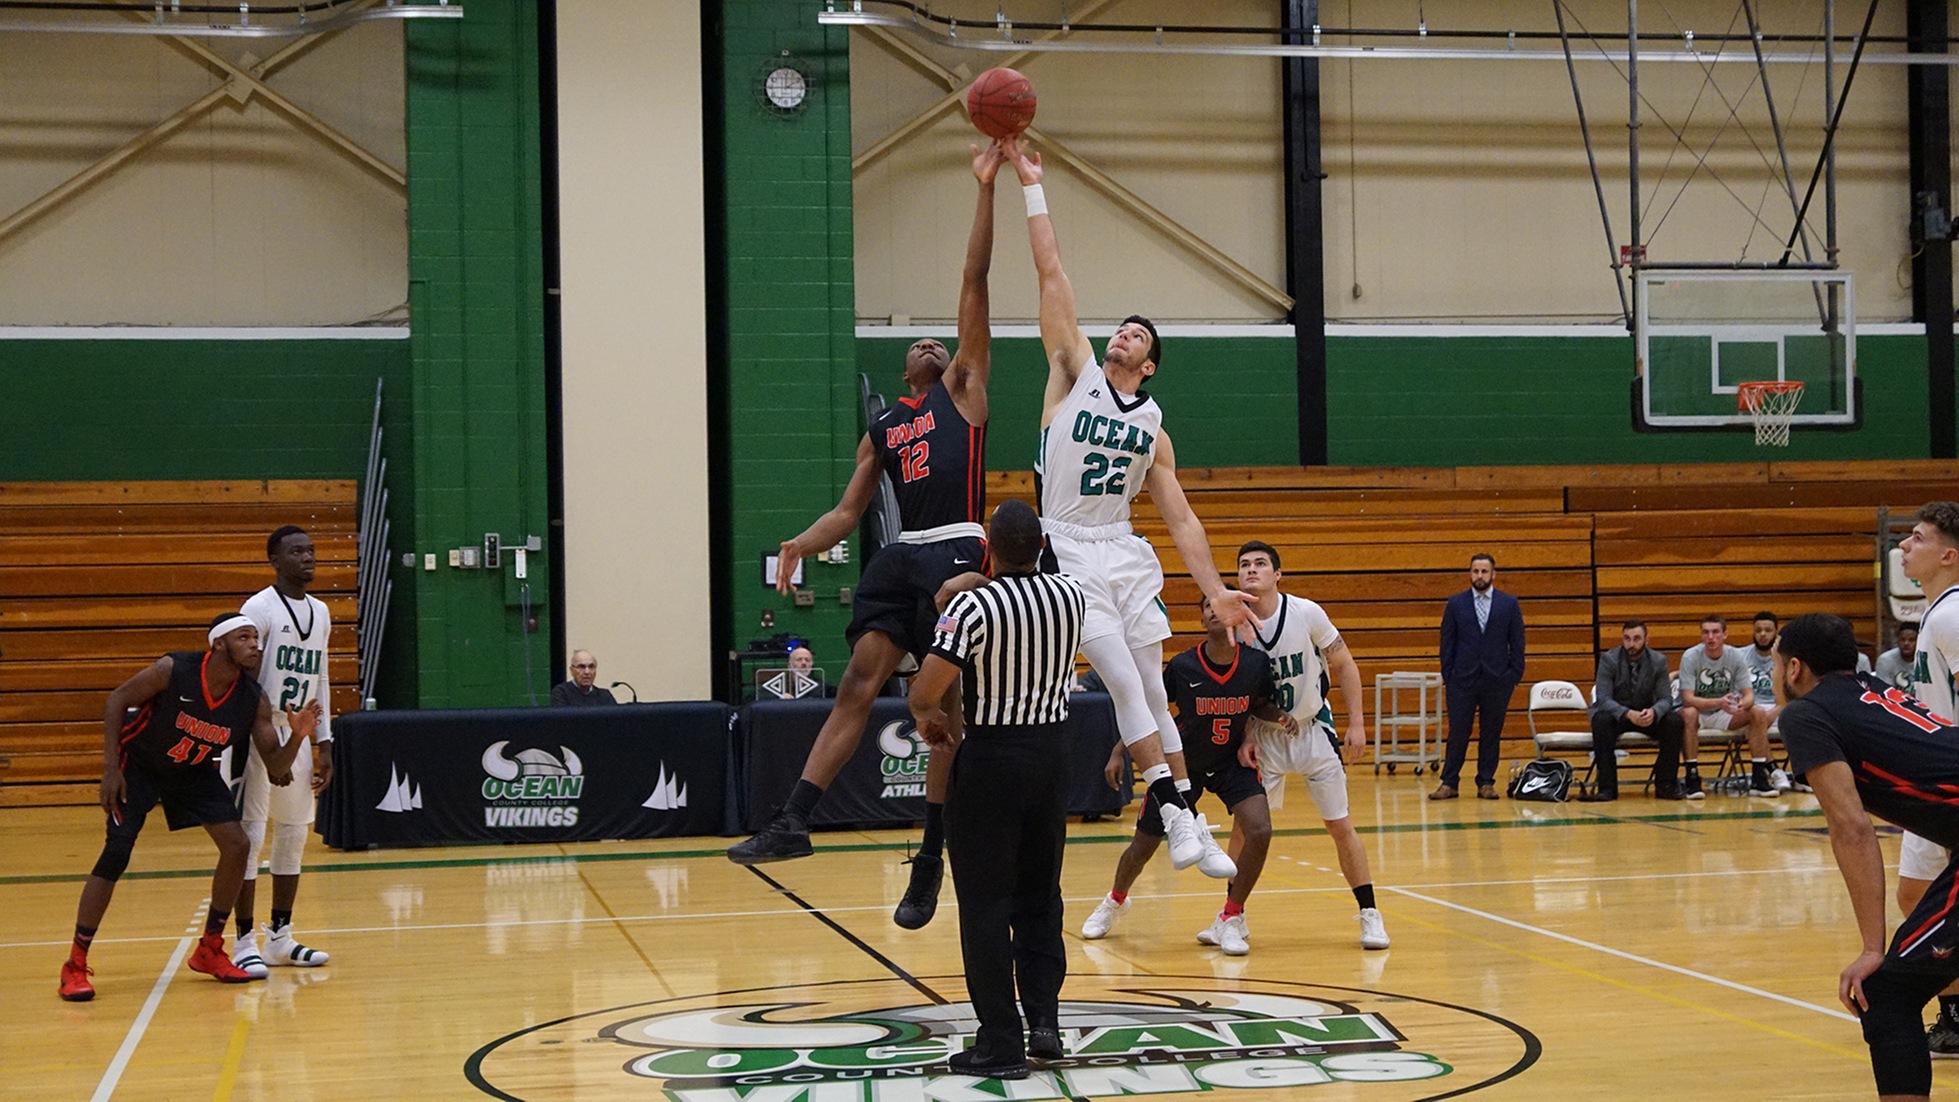 Laing Leads a Thrilling Vikings Win at Sussex, 78-74